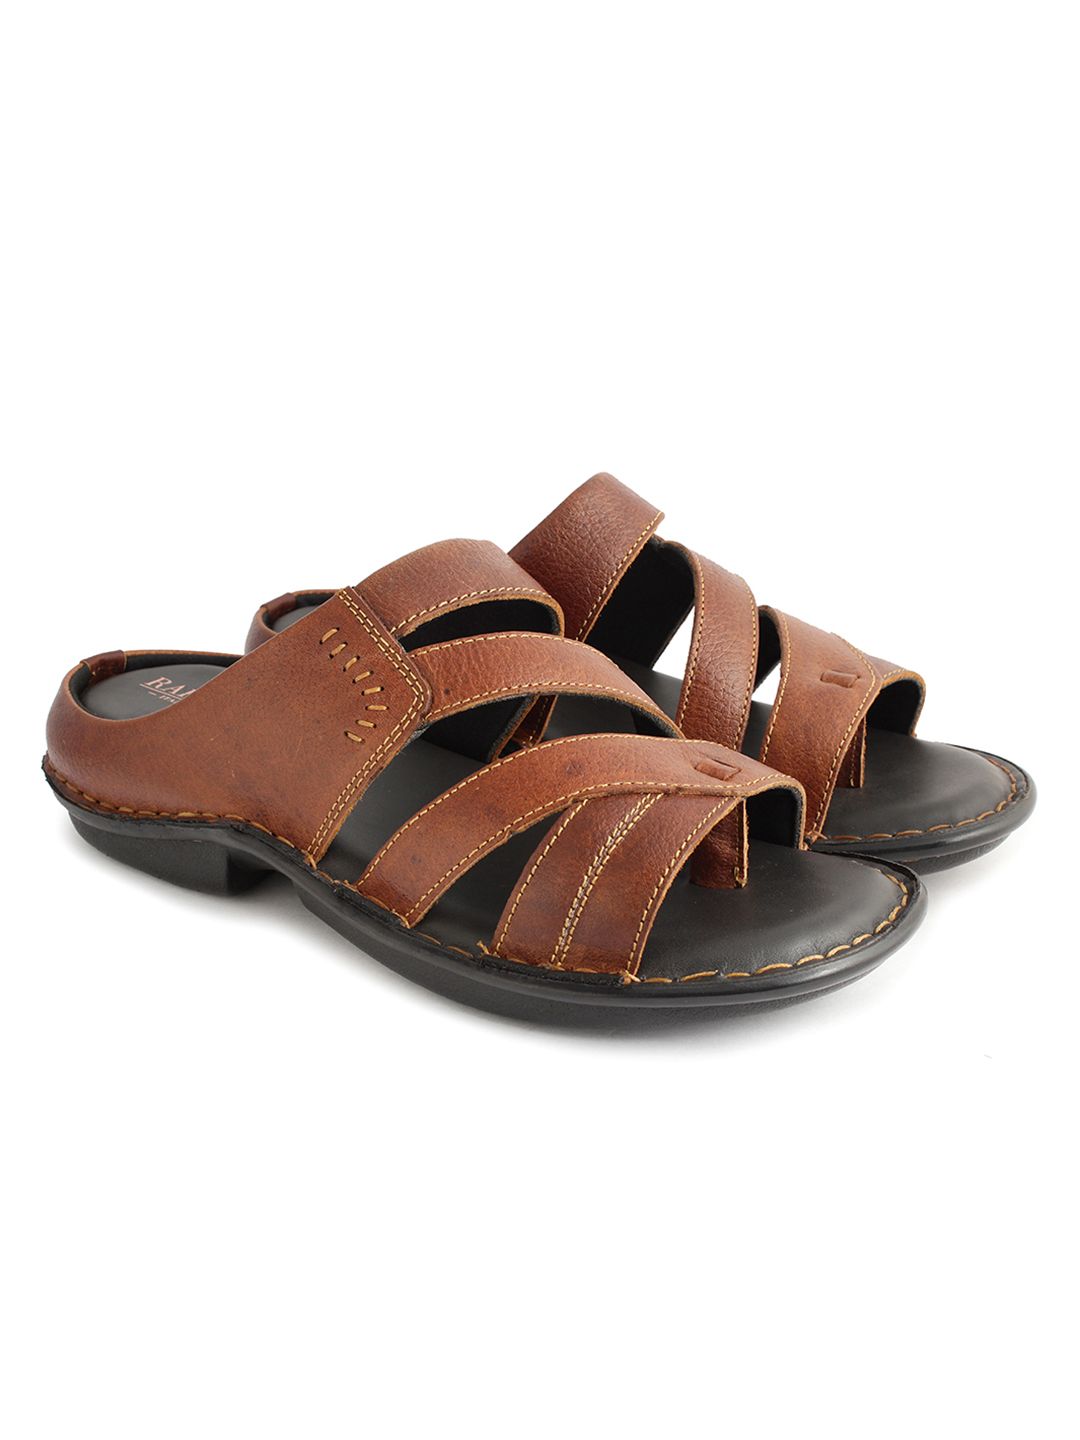 12 No Shoes Sandal - Buy 12 No Shoes Sandal online in India